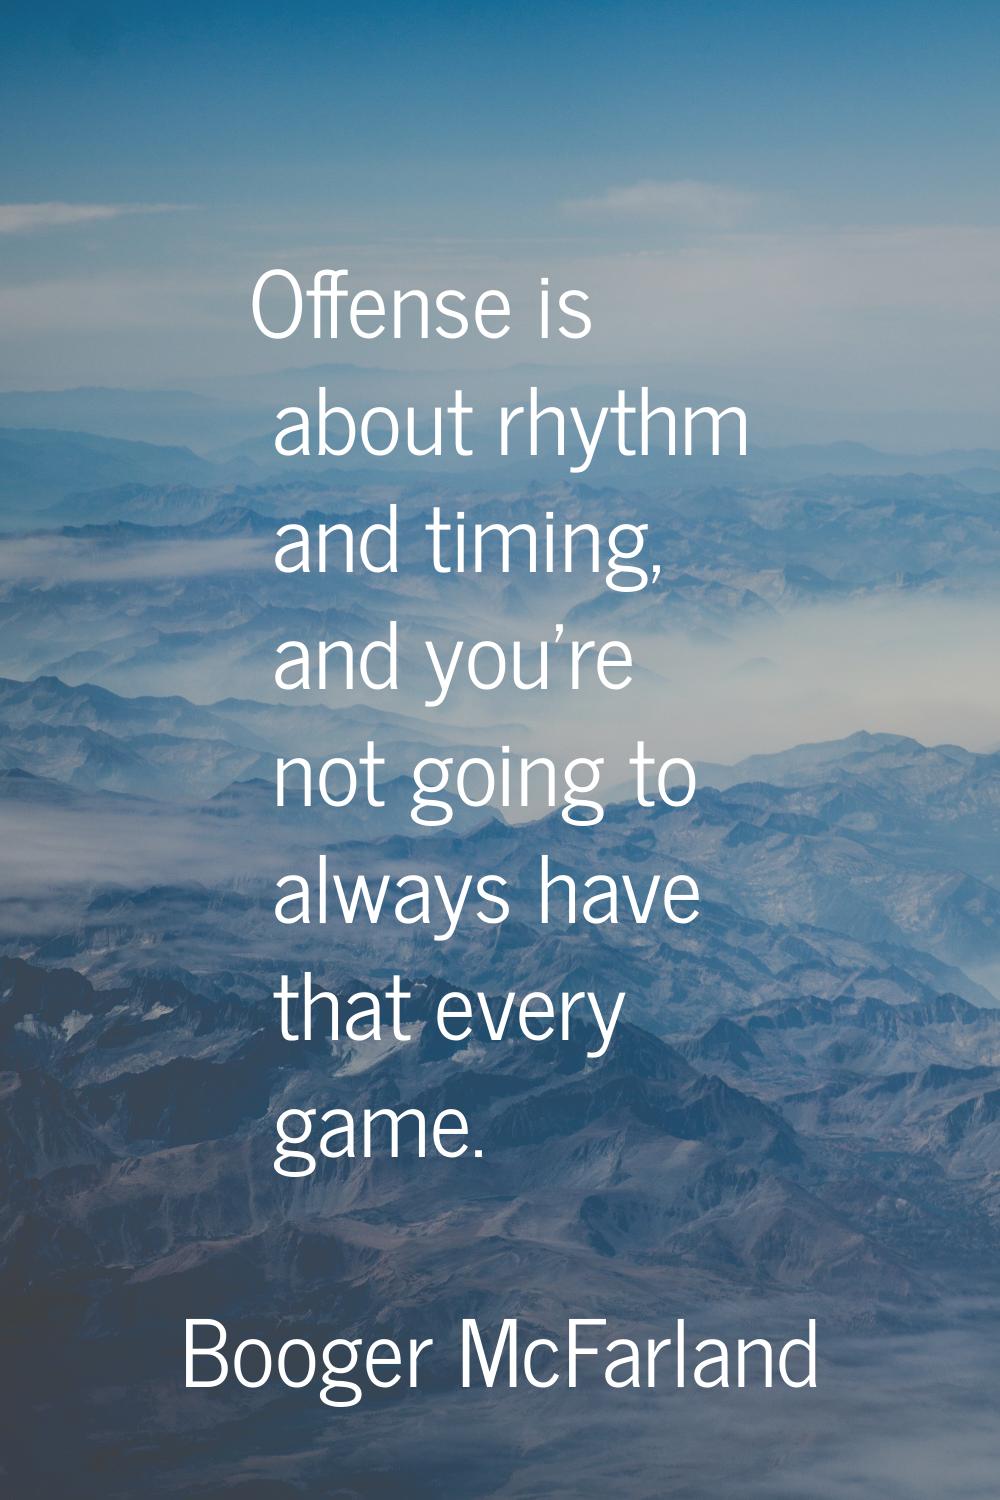 Offense is about rhythm and timing, and you're not going to always have that every game.